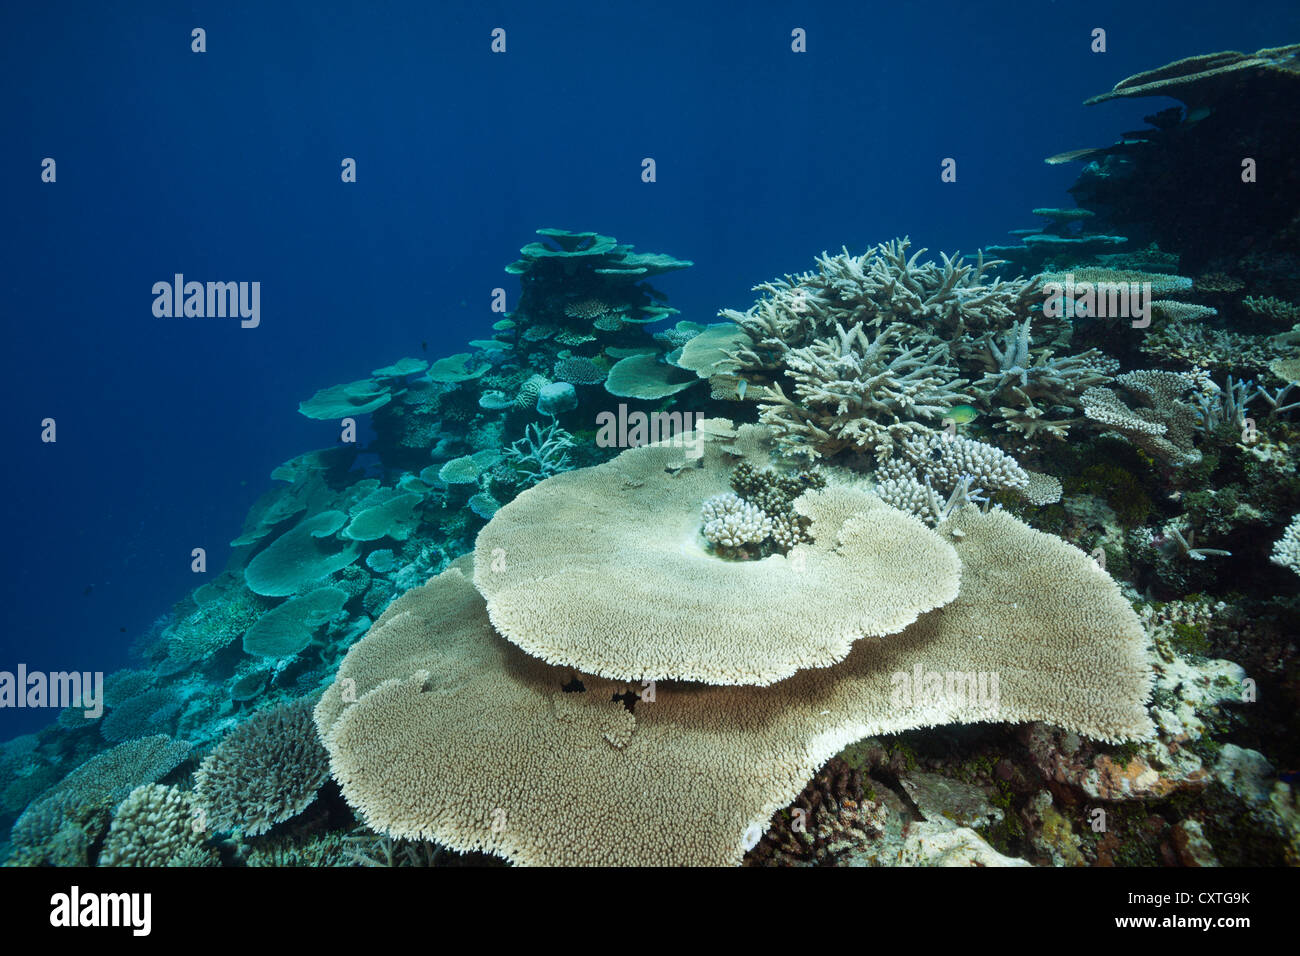 Table Corals growing at Reef, Acropora sp., Thaa Atoll, Maldives Stock Photo